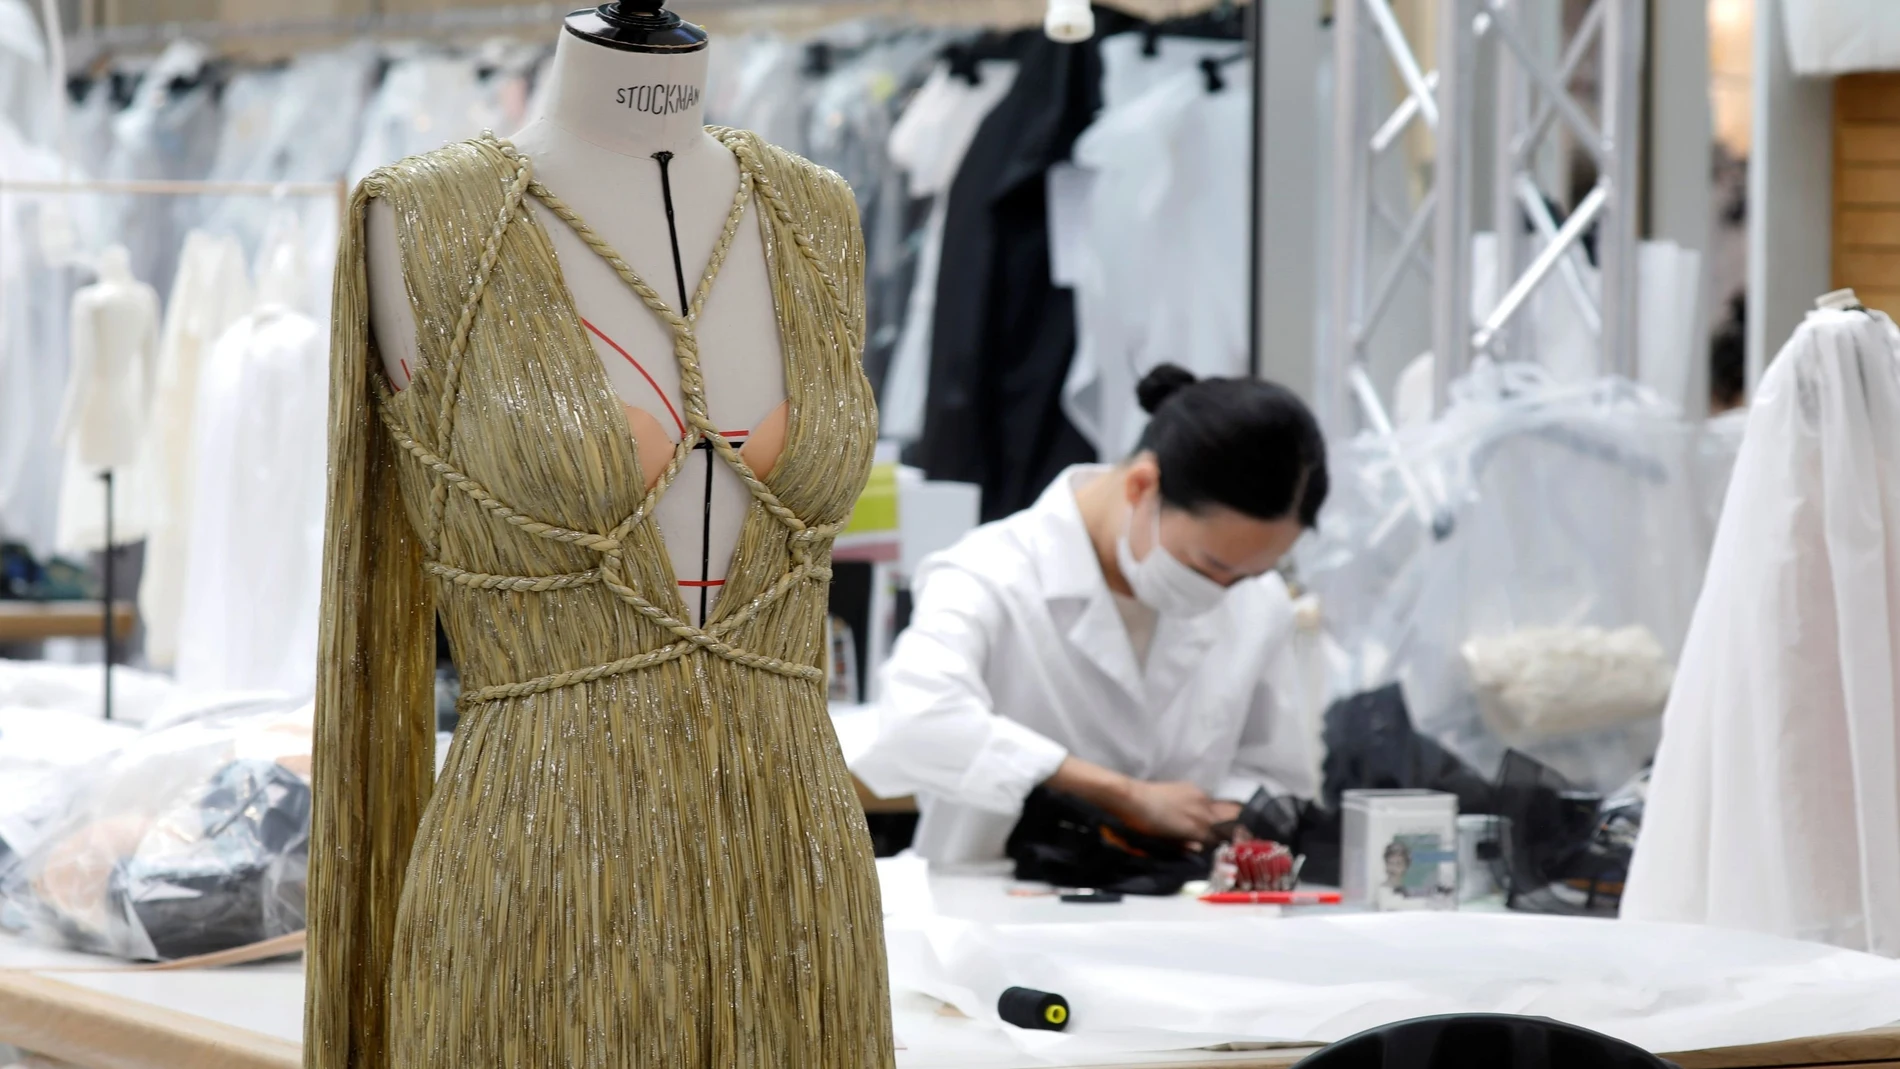 Paris Haute Couture week goes online after the coronavirus outbreak